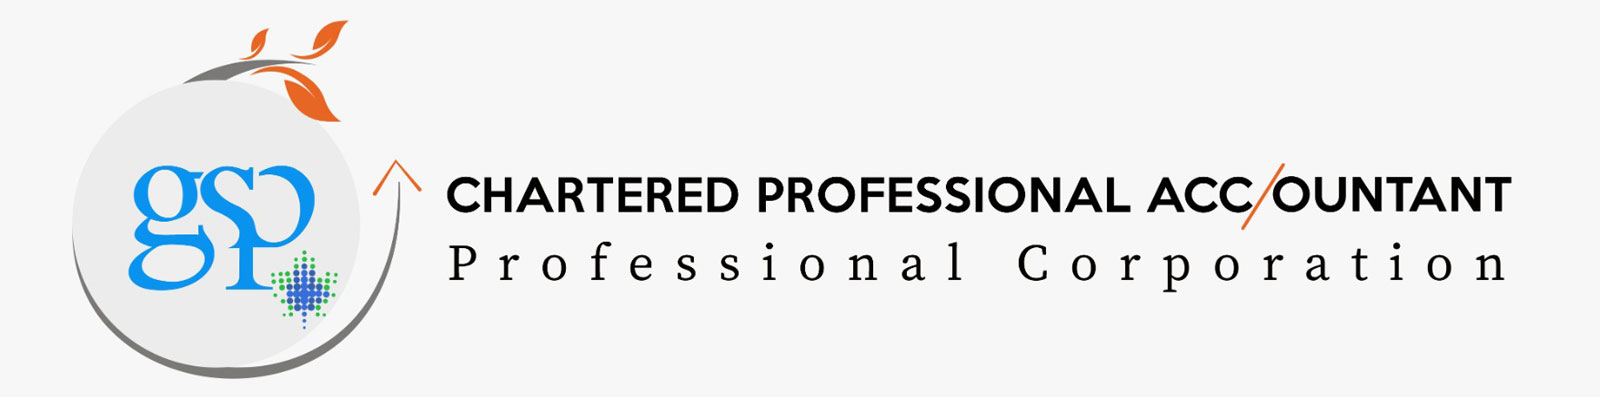 GSP Chartered Professional Accountant Professional Corporation Logo